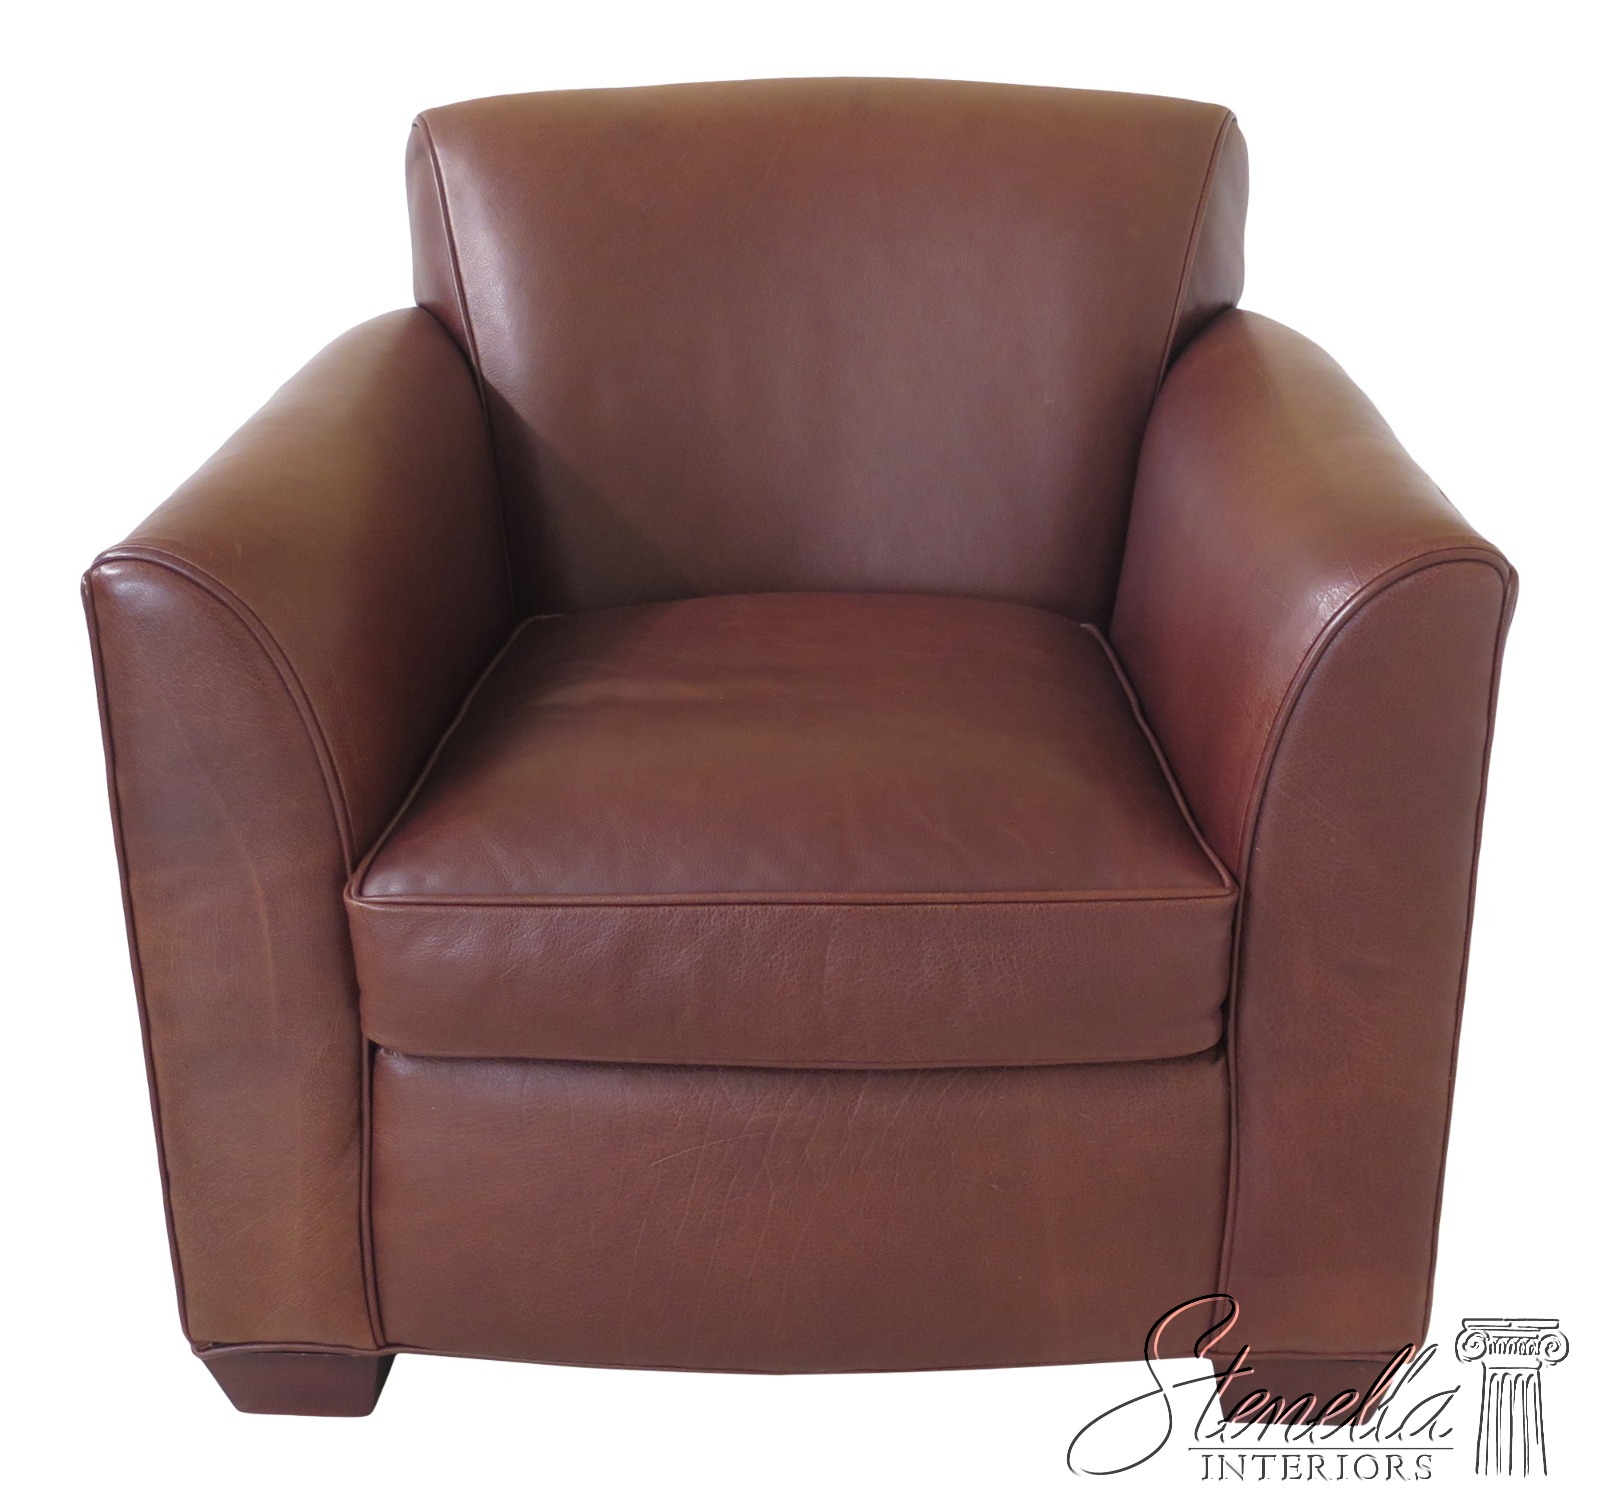 48877ec Crate Barrel Brown Leather Living Room Chair By Lee Ebay